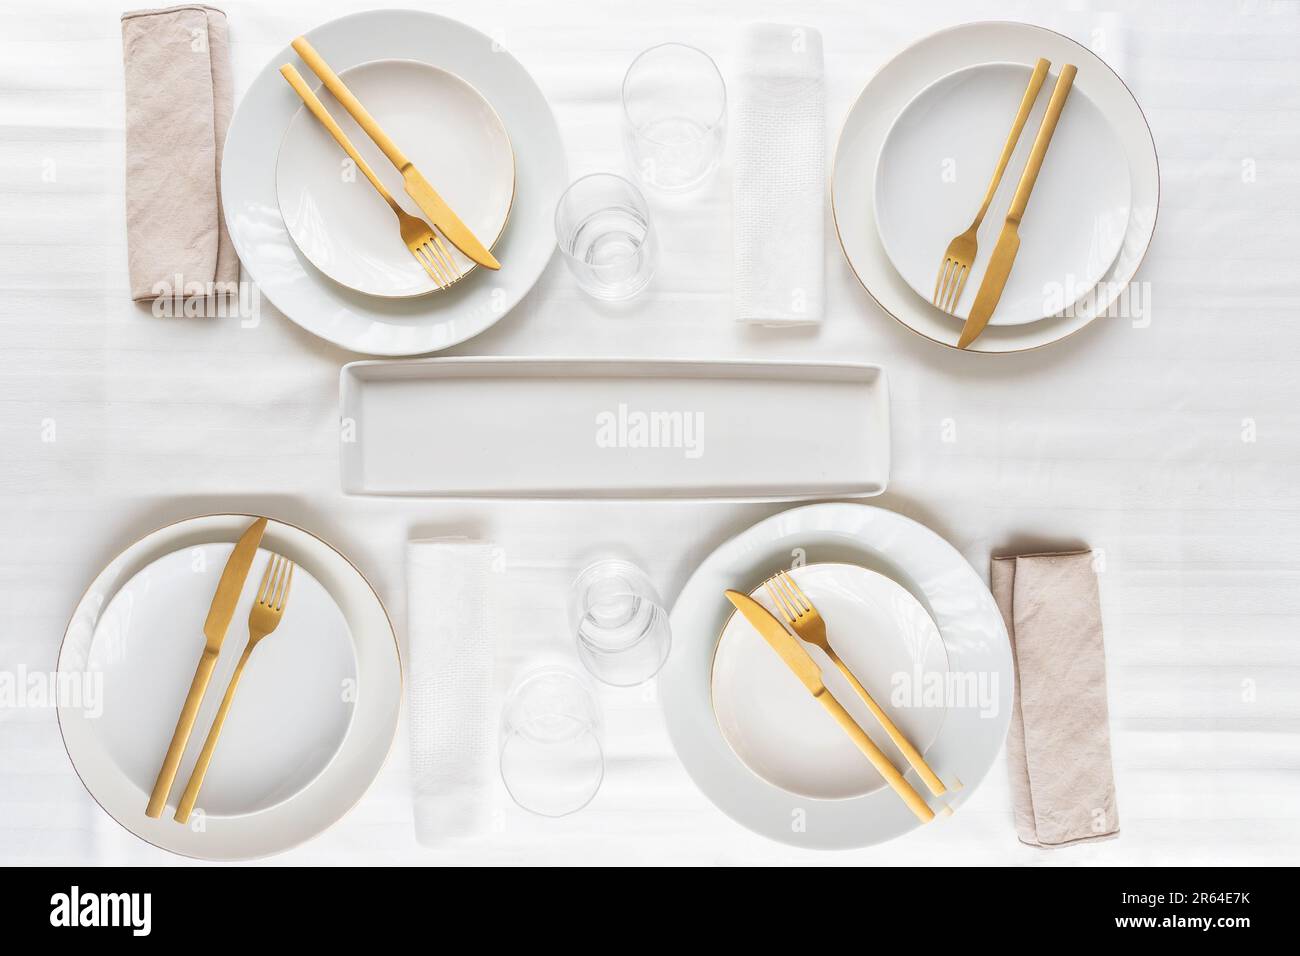 Top view of tableware with linen napkins, gold cutlery and white porcelain plates. Minimalist table settings background for dinner. Stock Photo